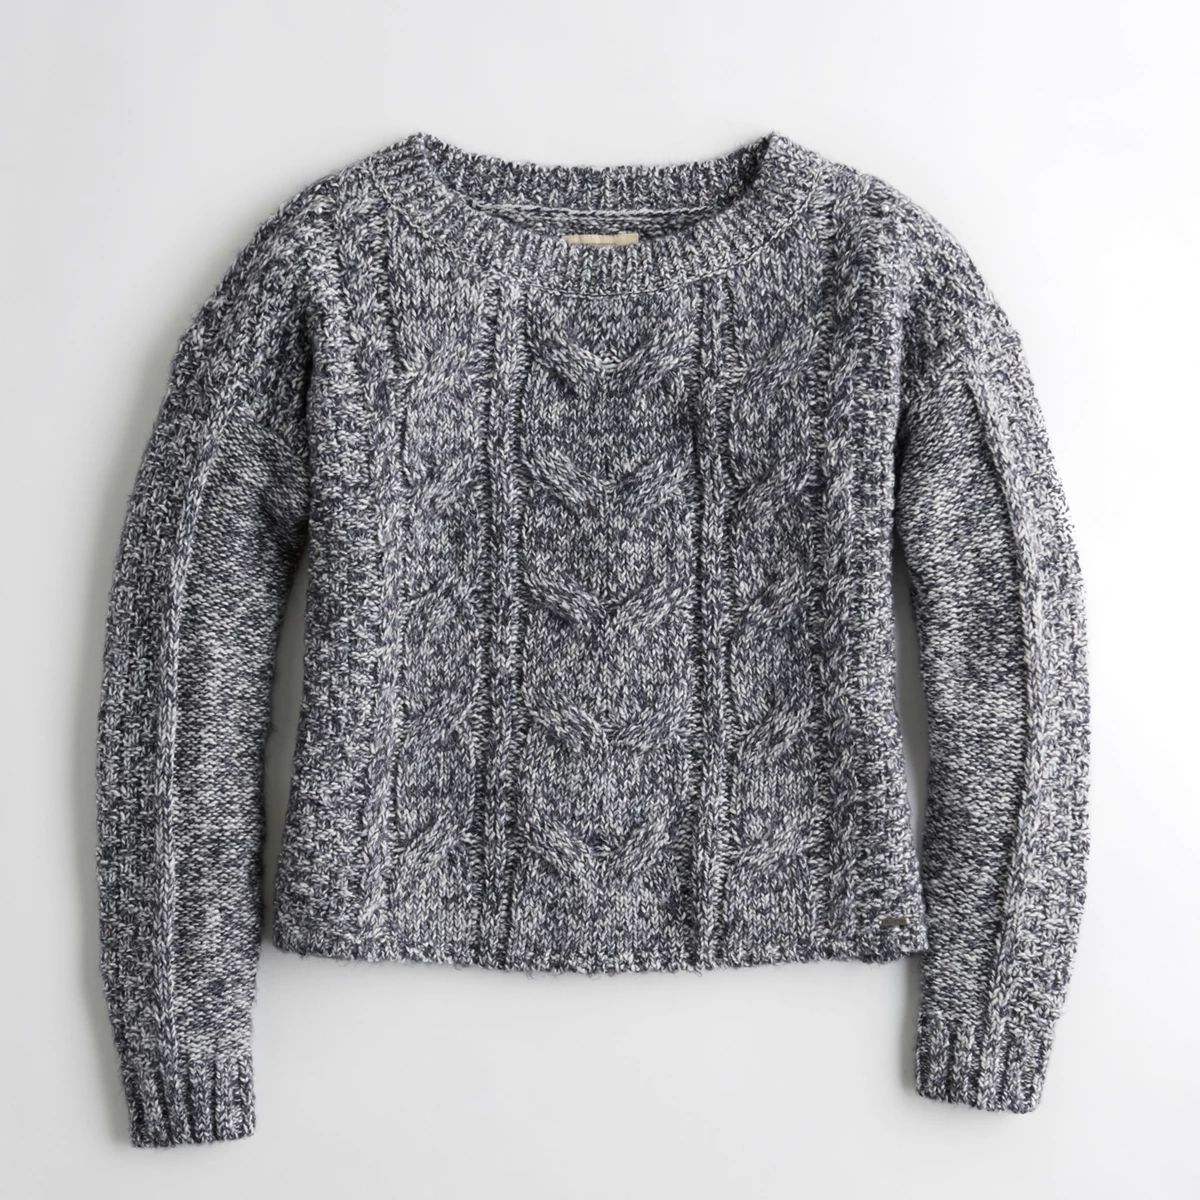 Girls Cable Crewneck Sweater from Hollister | Hollister US